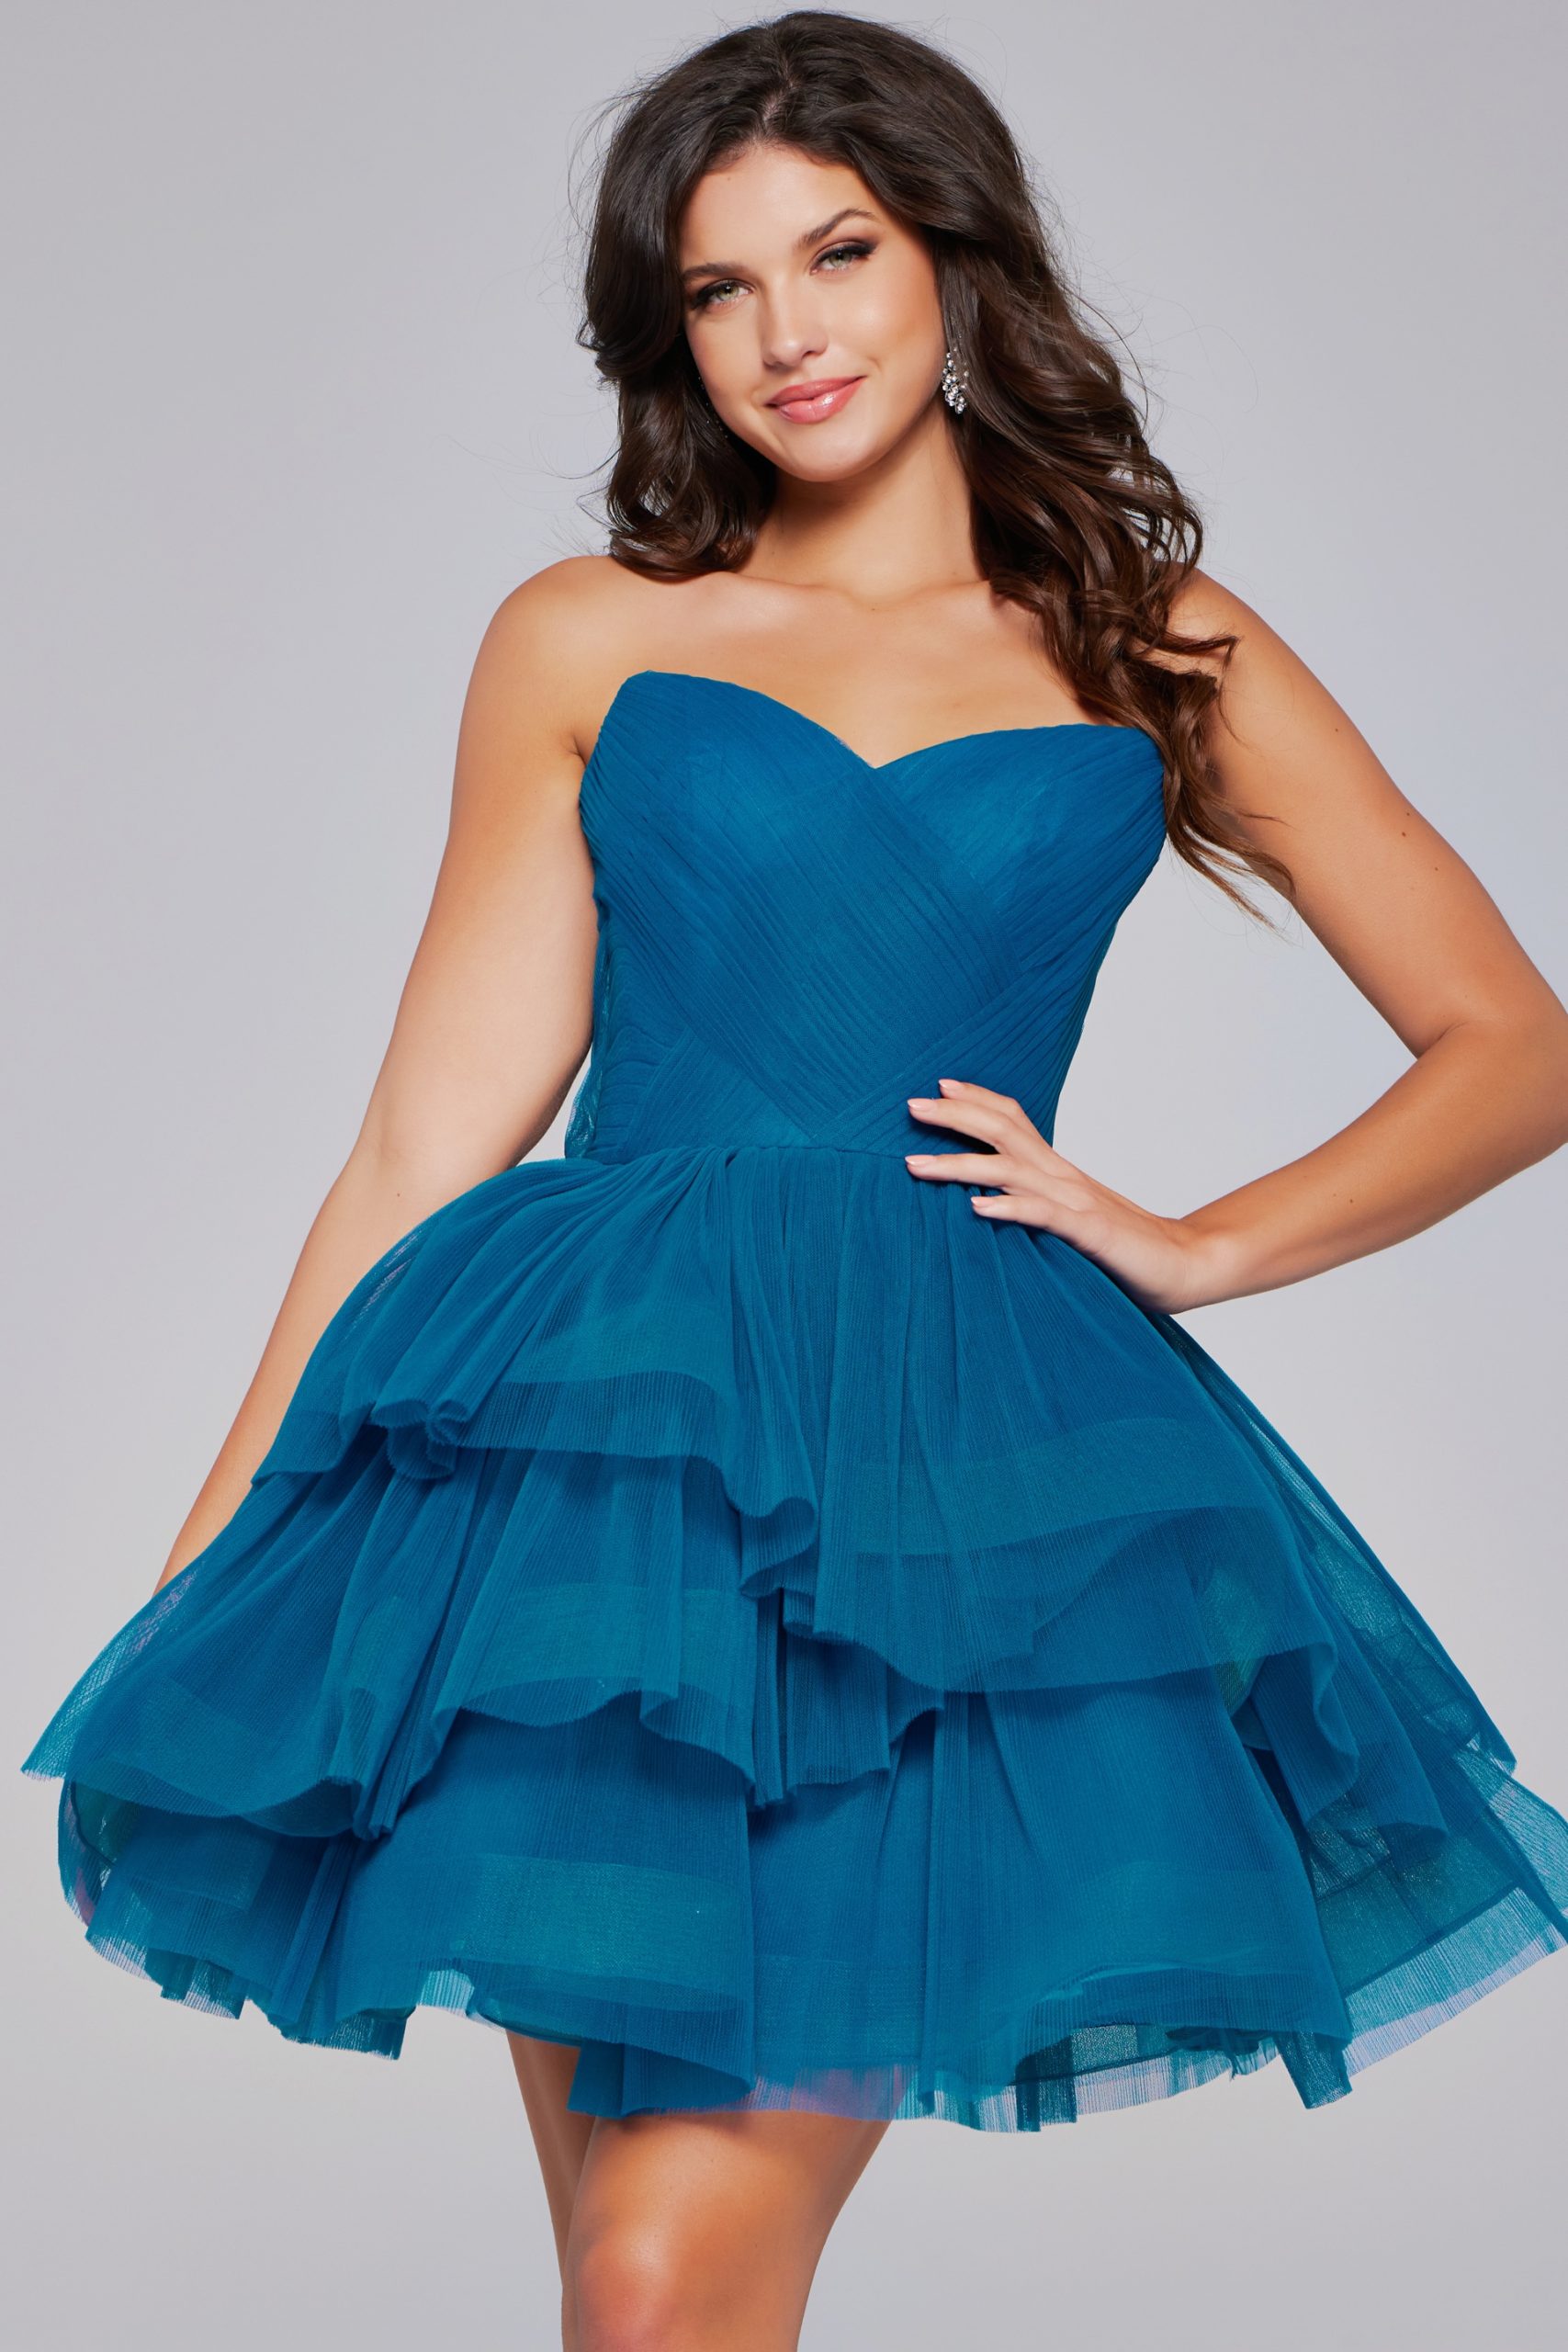 Teal Strapless Tulle Dress 41054